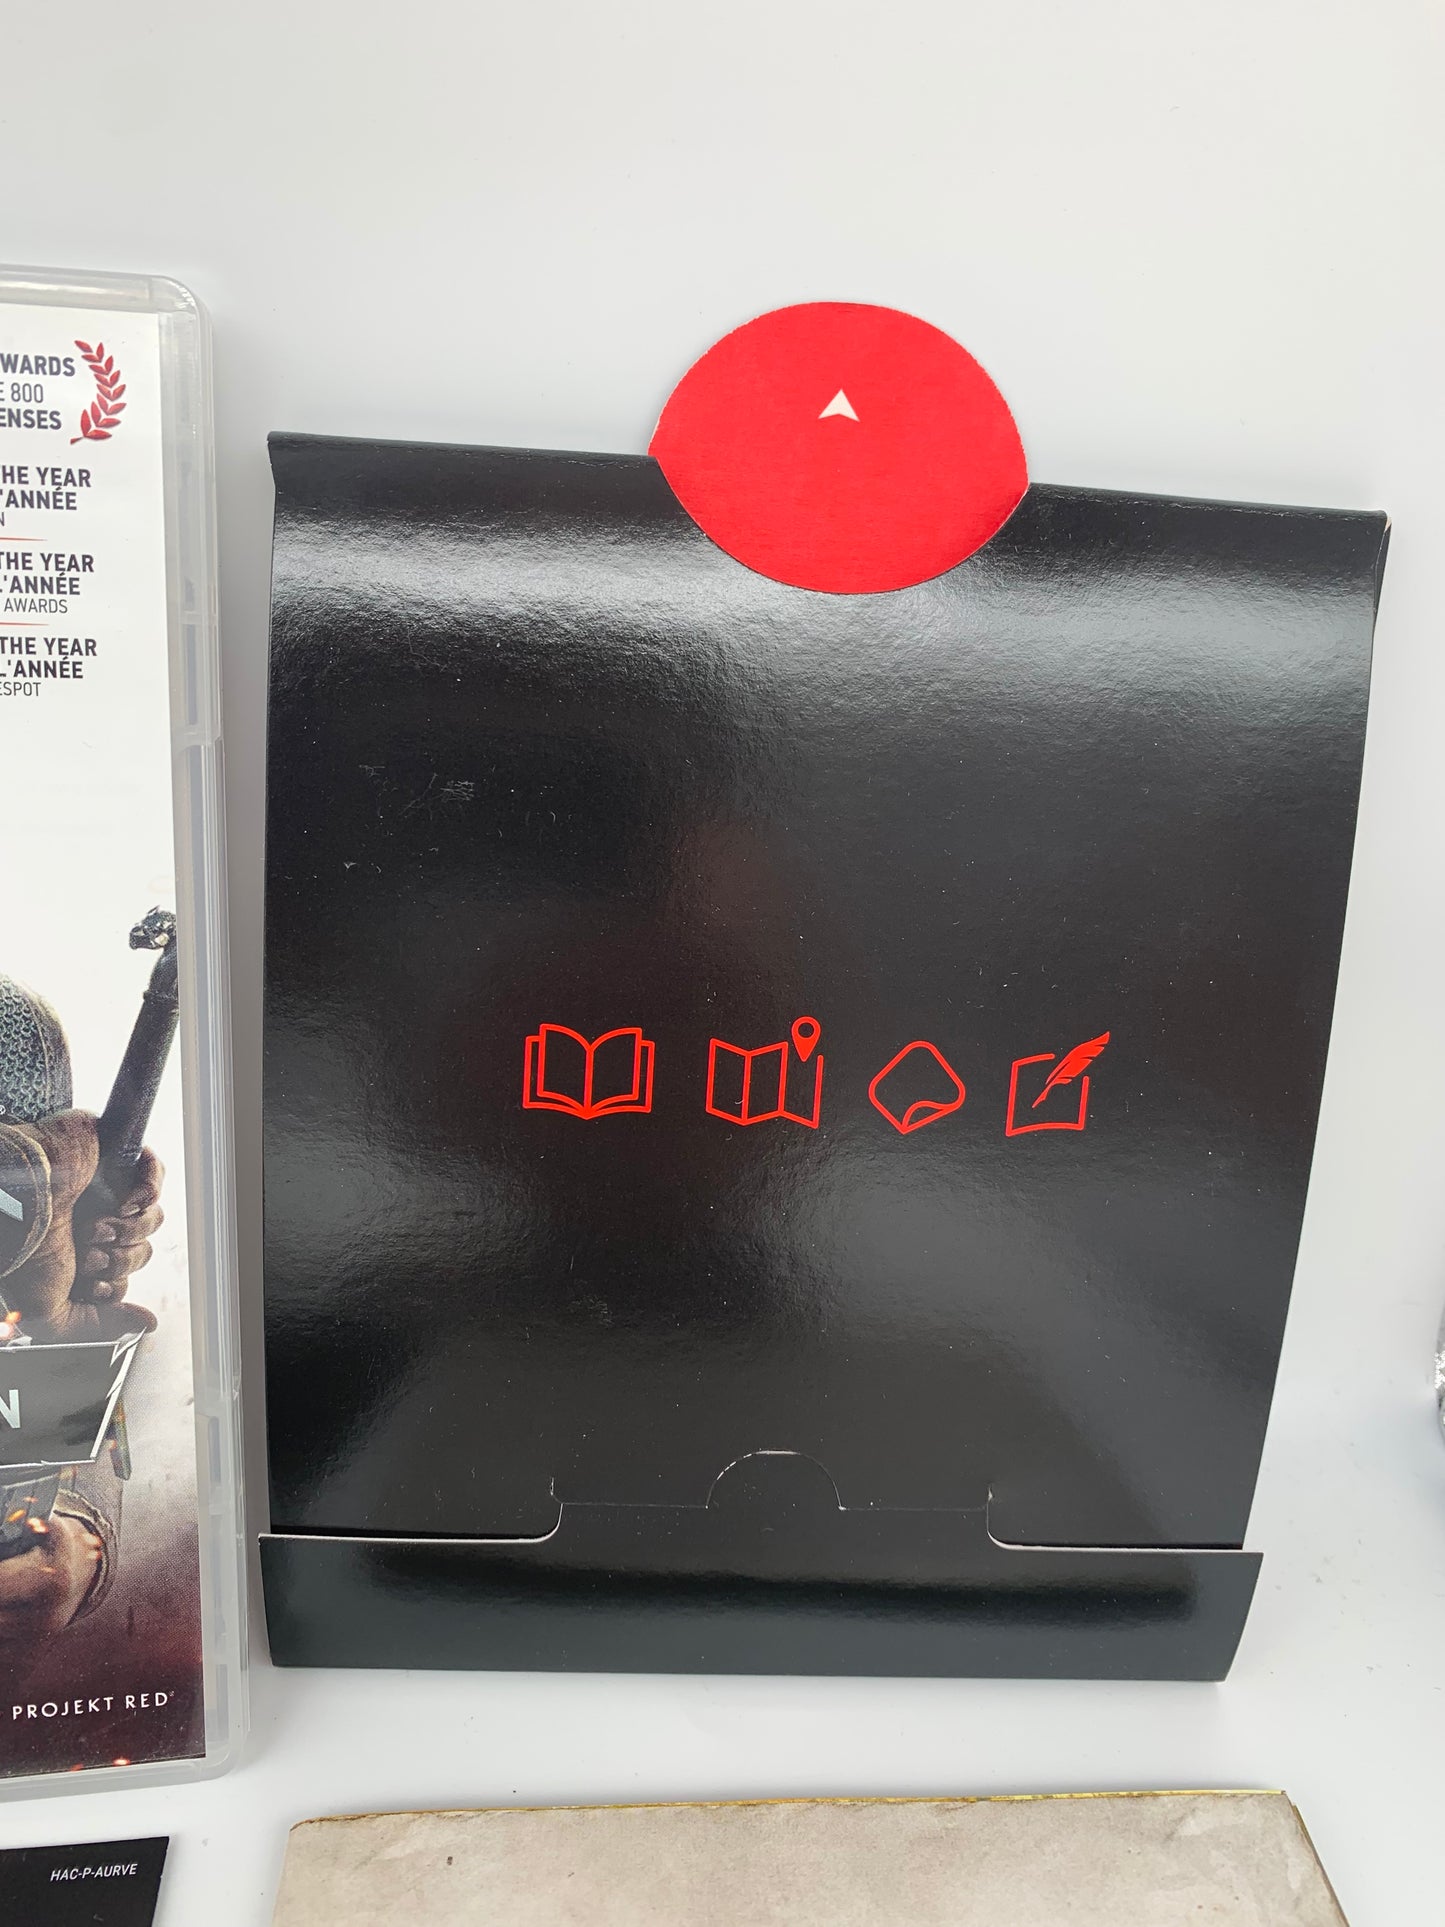 NiNTENDO SWiTCH | THE WiTCHER III WiLD HUNT | COMPLETE EDiTiON